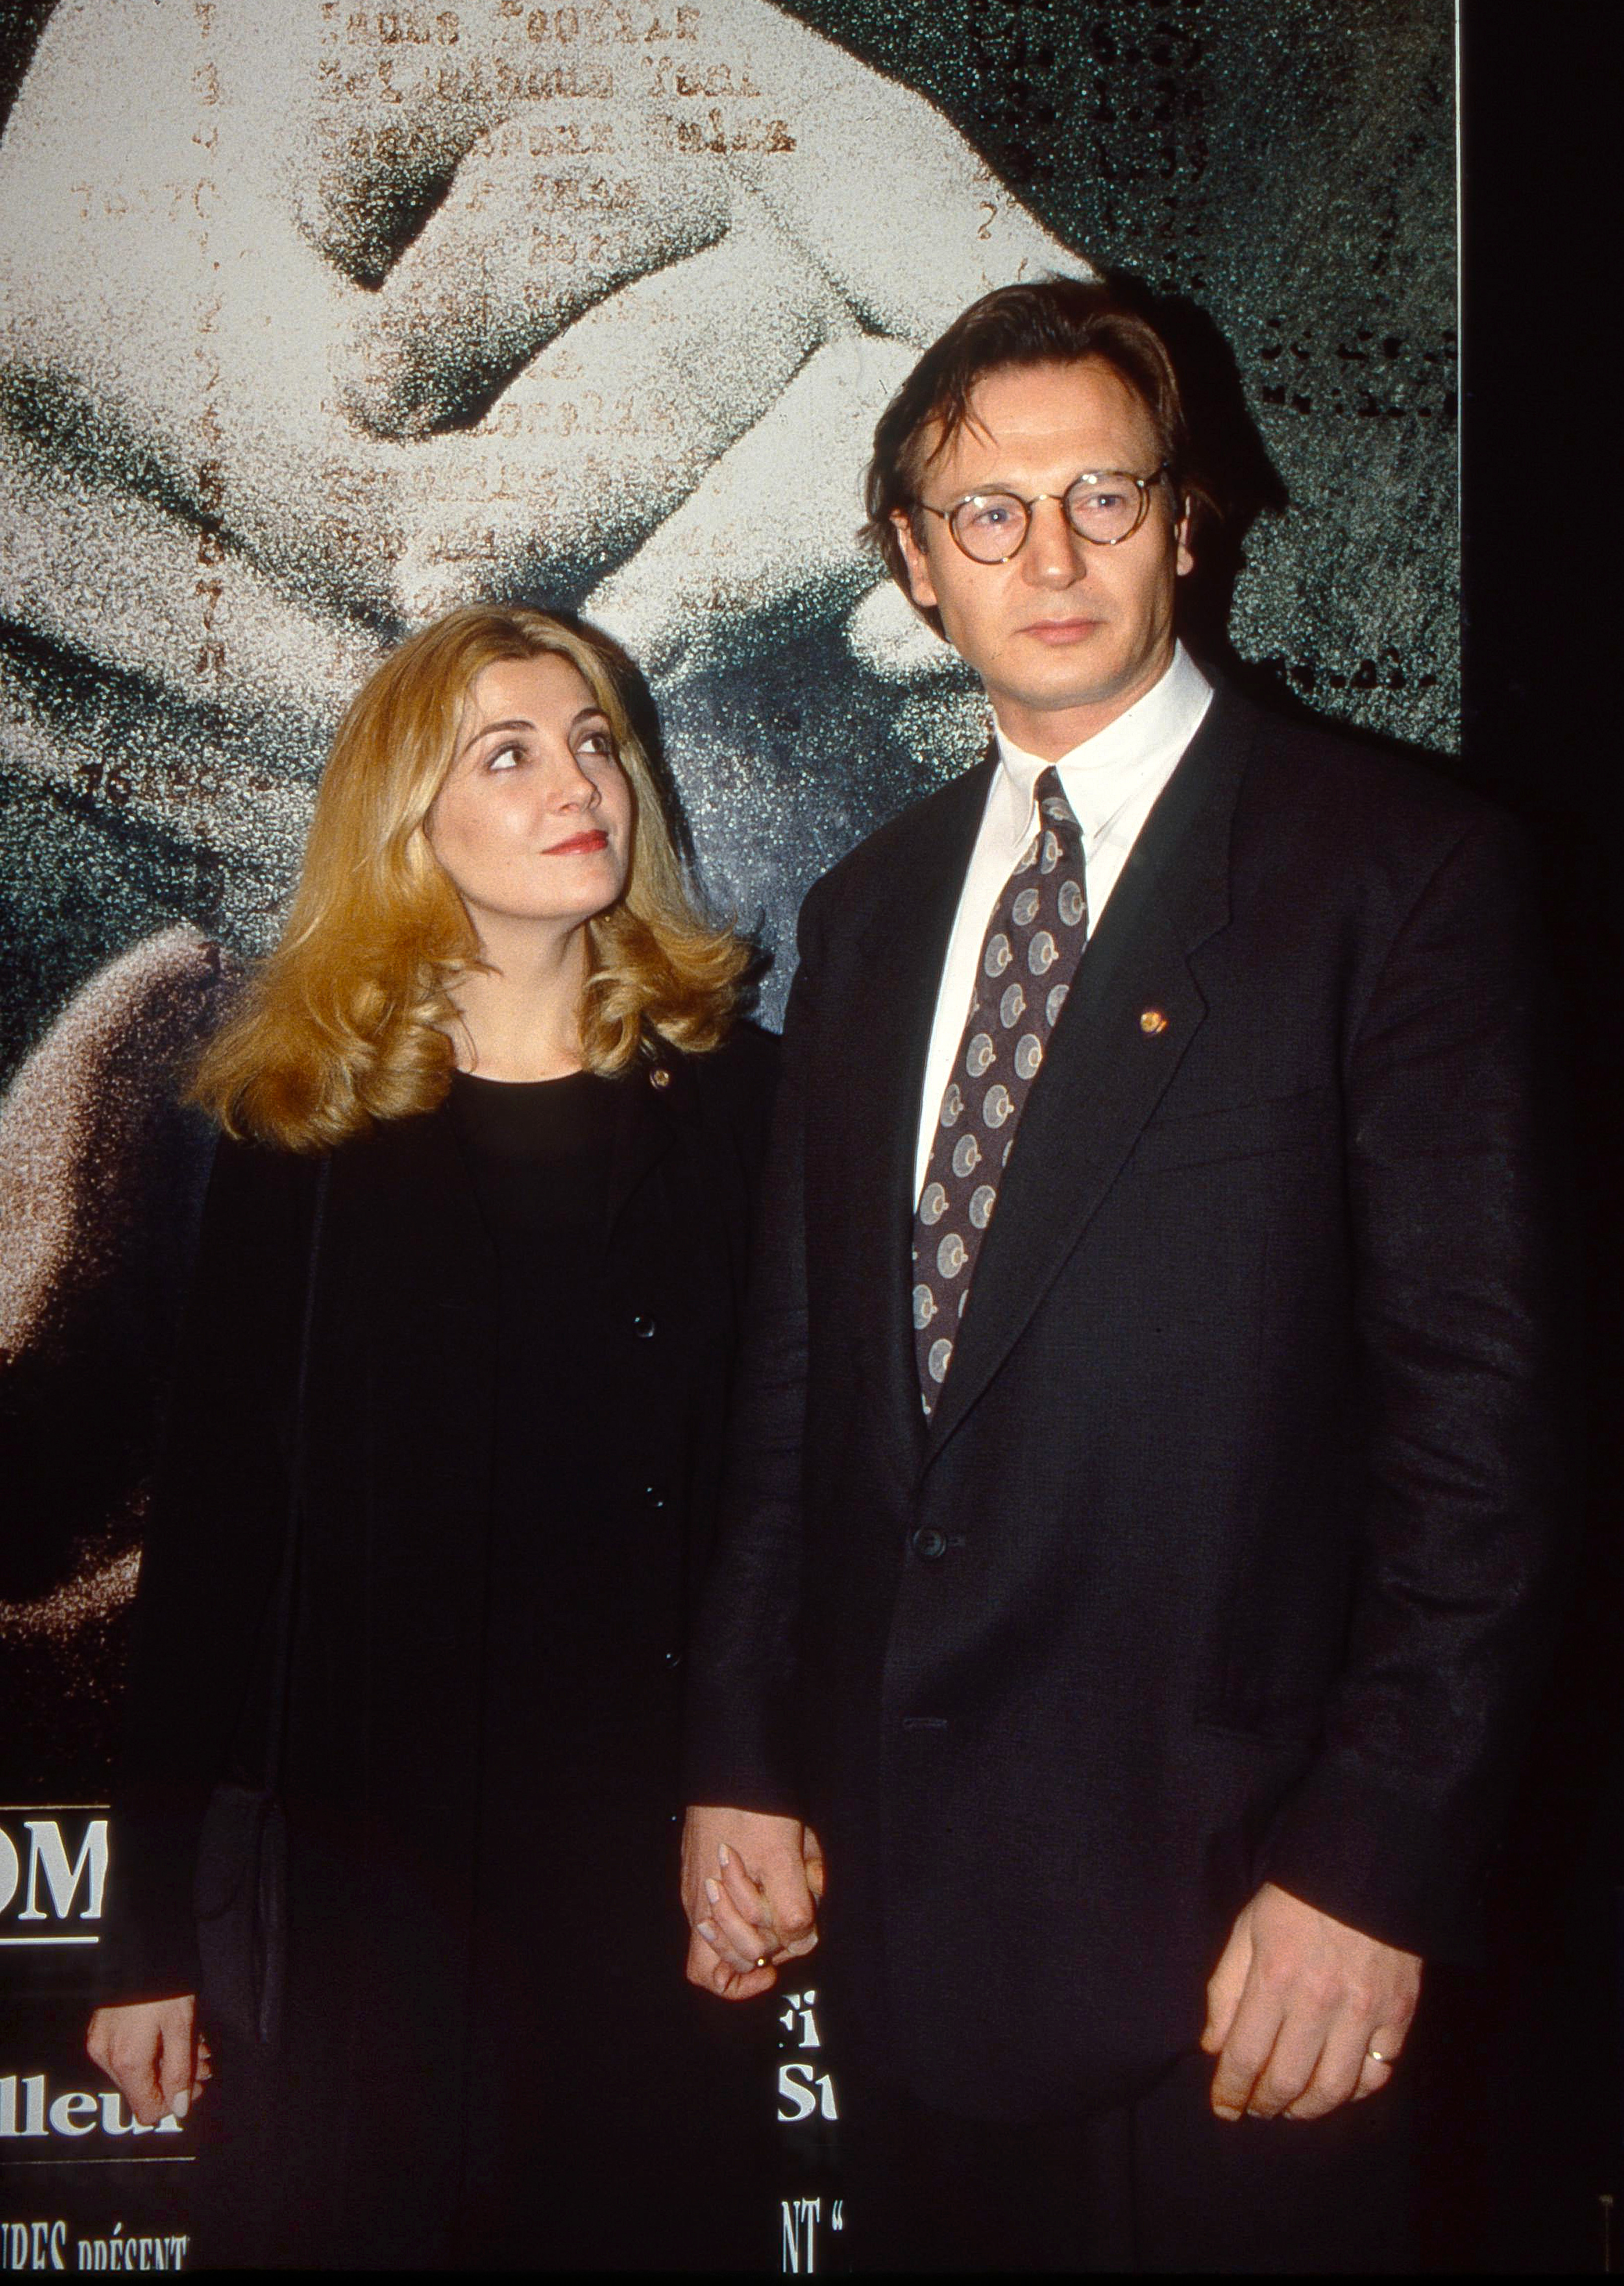 Natasha Richardson and Liam Neeson at the "Schindler's List" premiere in Paris, France on February 28, 1994 | Source: Getty Images